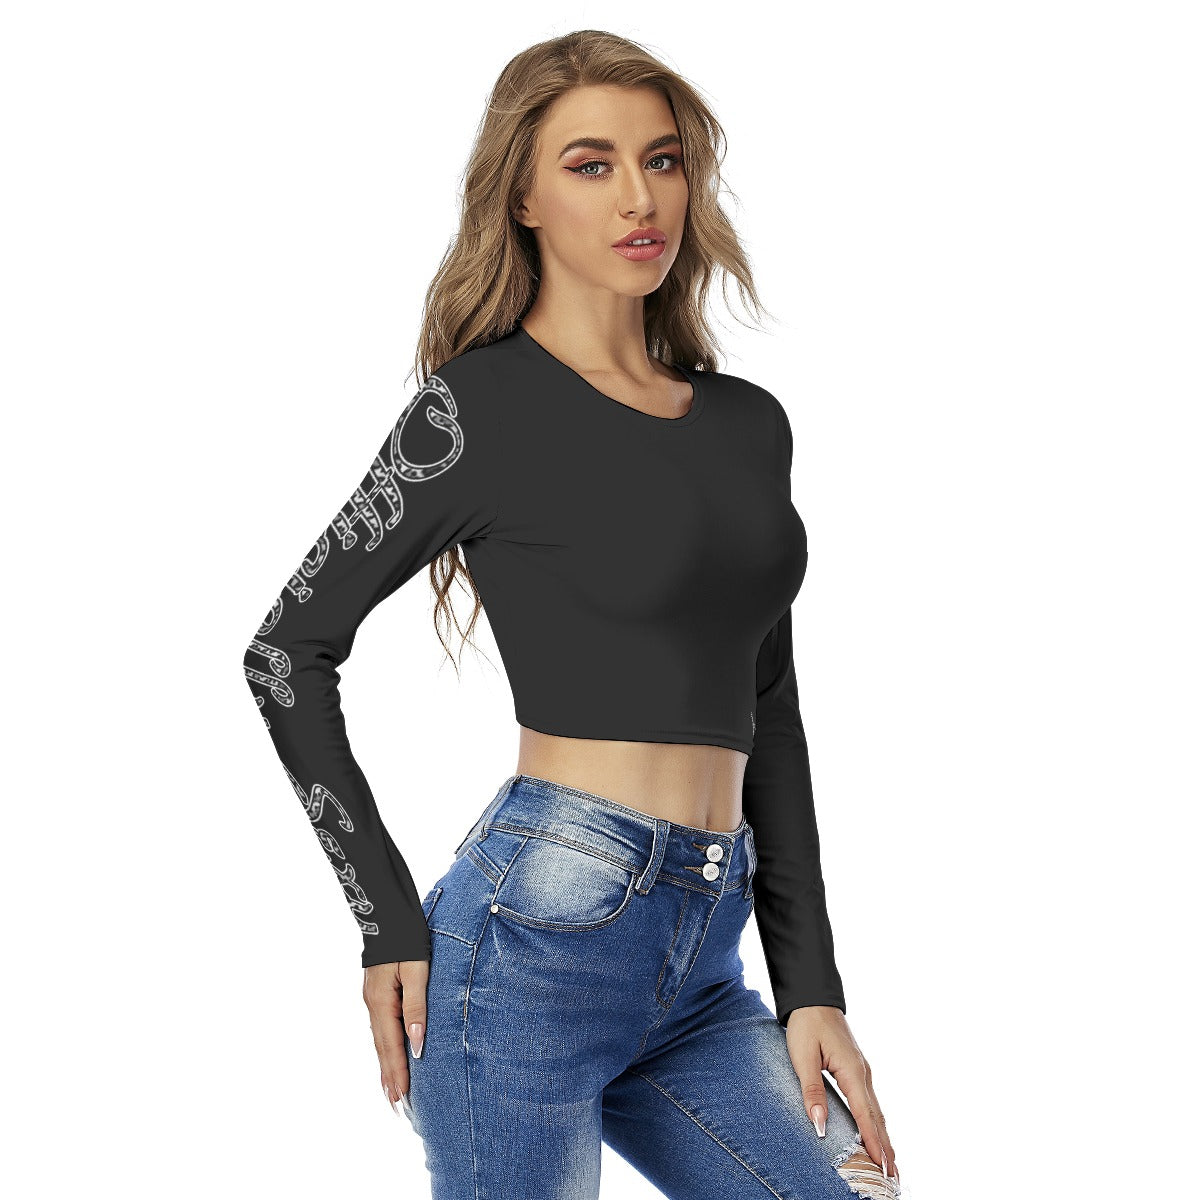 Officially Sexy Snow Leopard Print Collection Women's Black Round Neck Crop Top Long Sleeve T-Shirt (English) 2